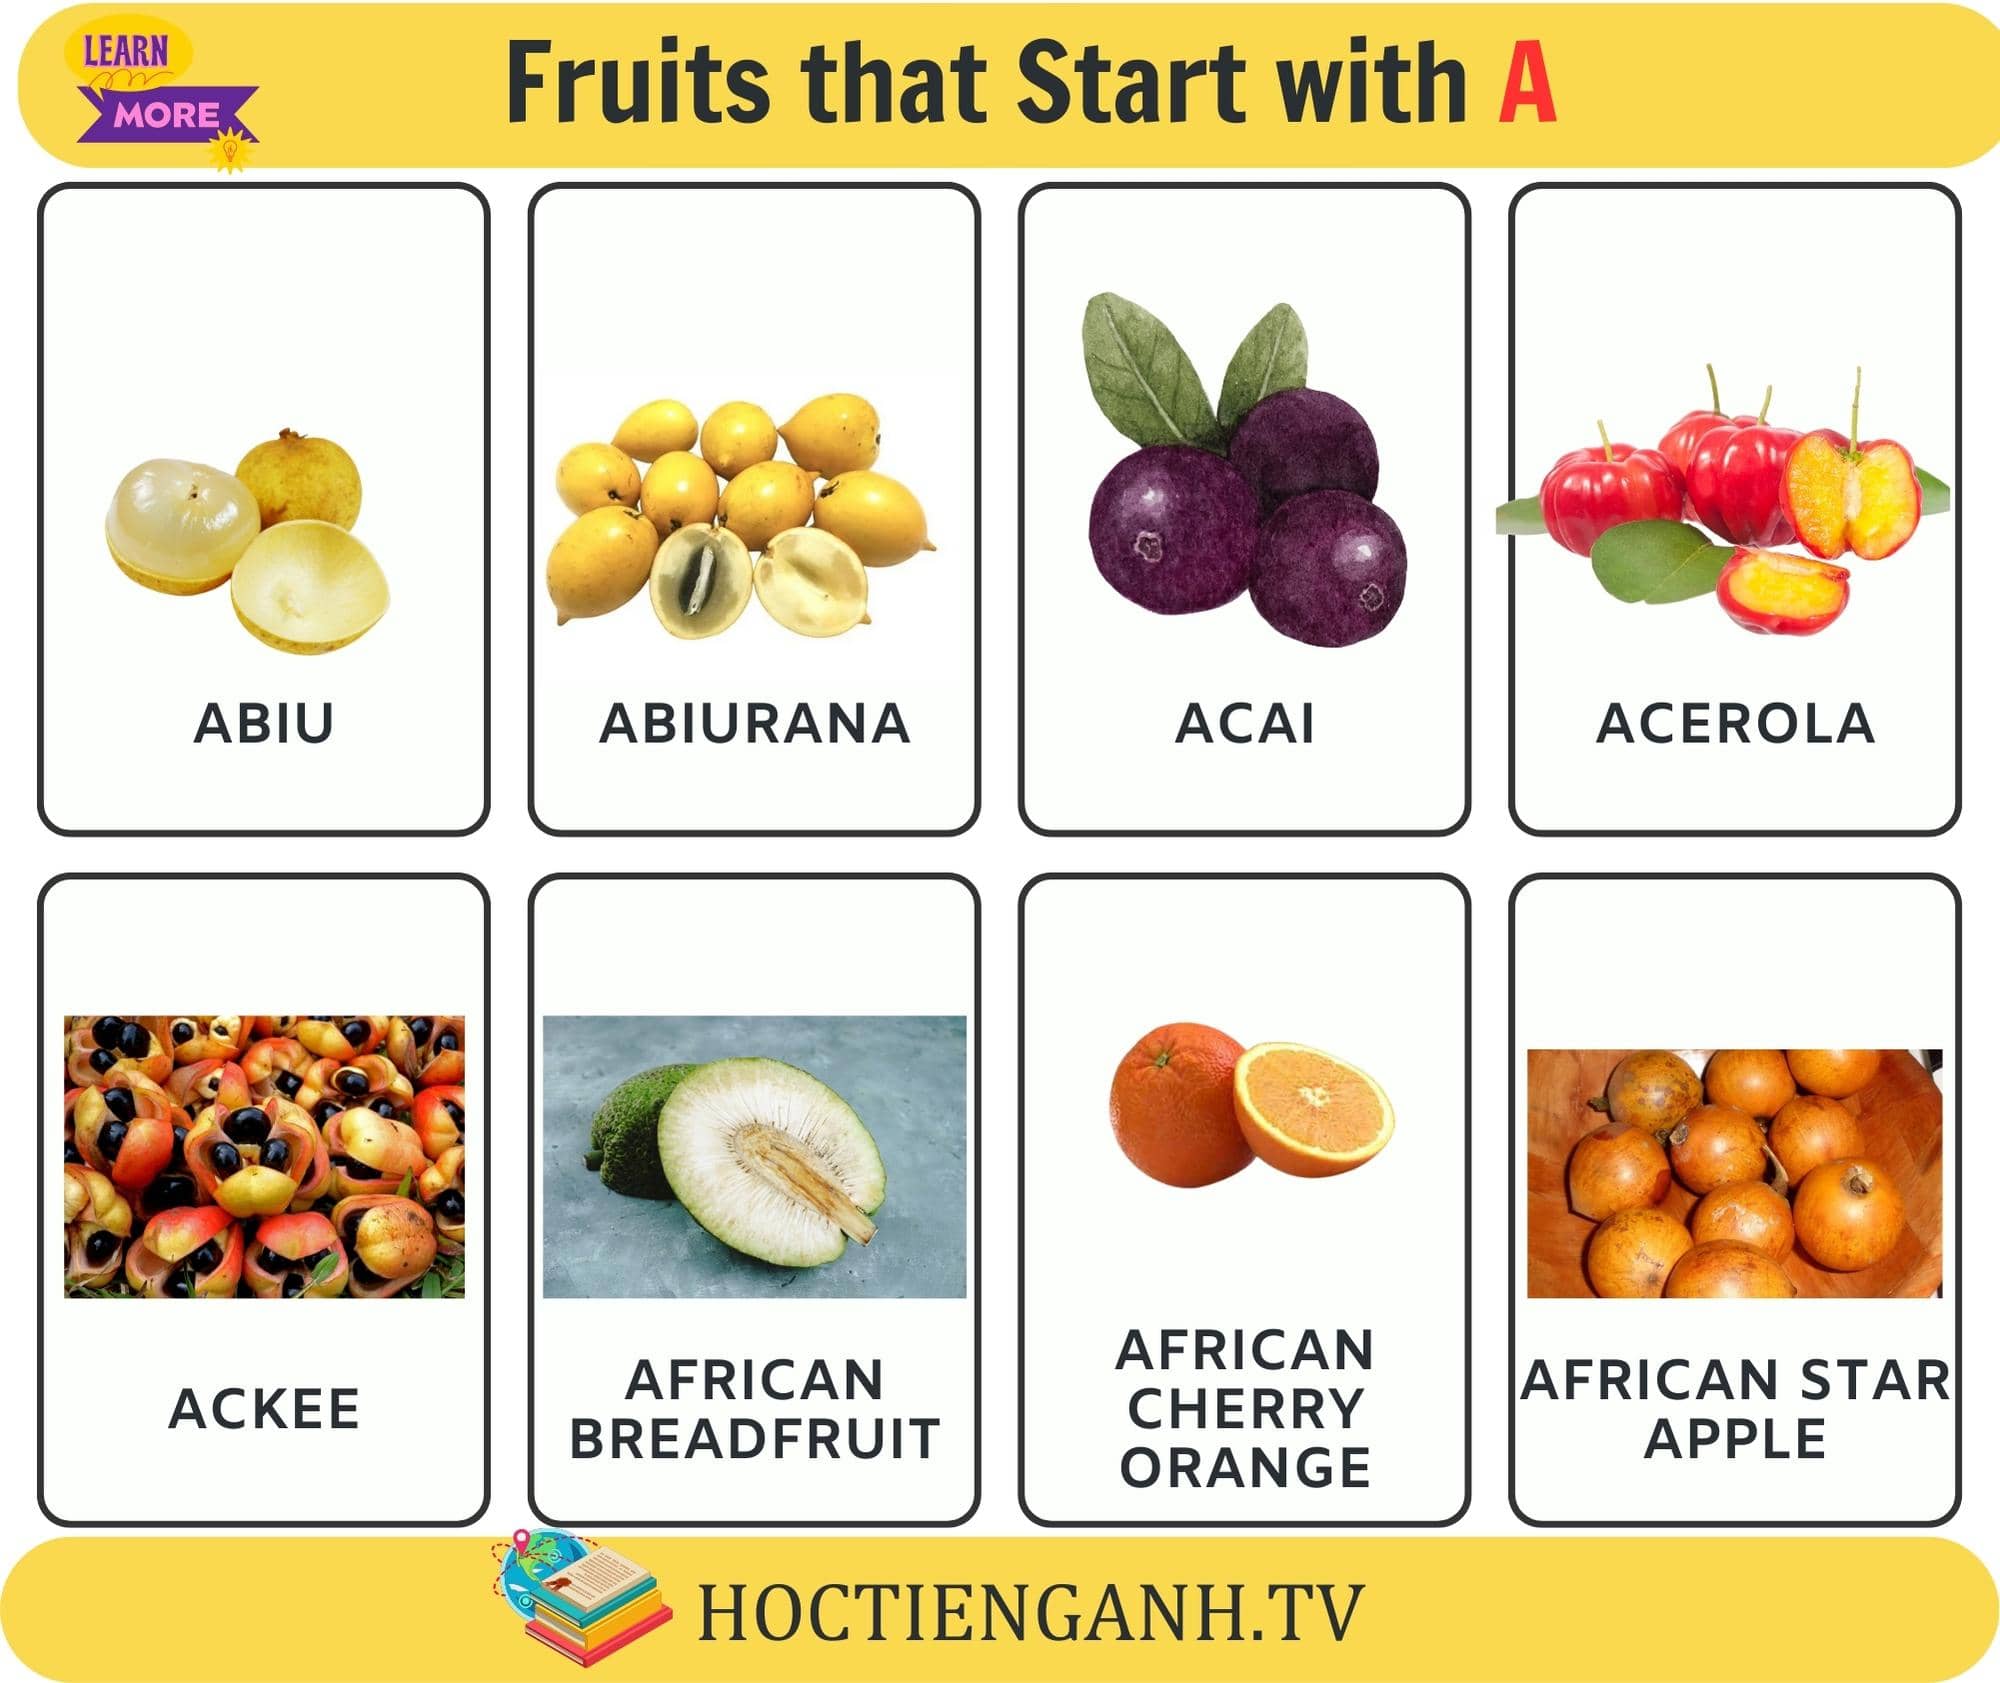 Fruits that Start with A